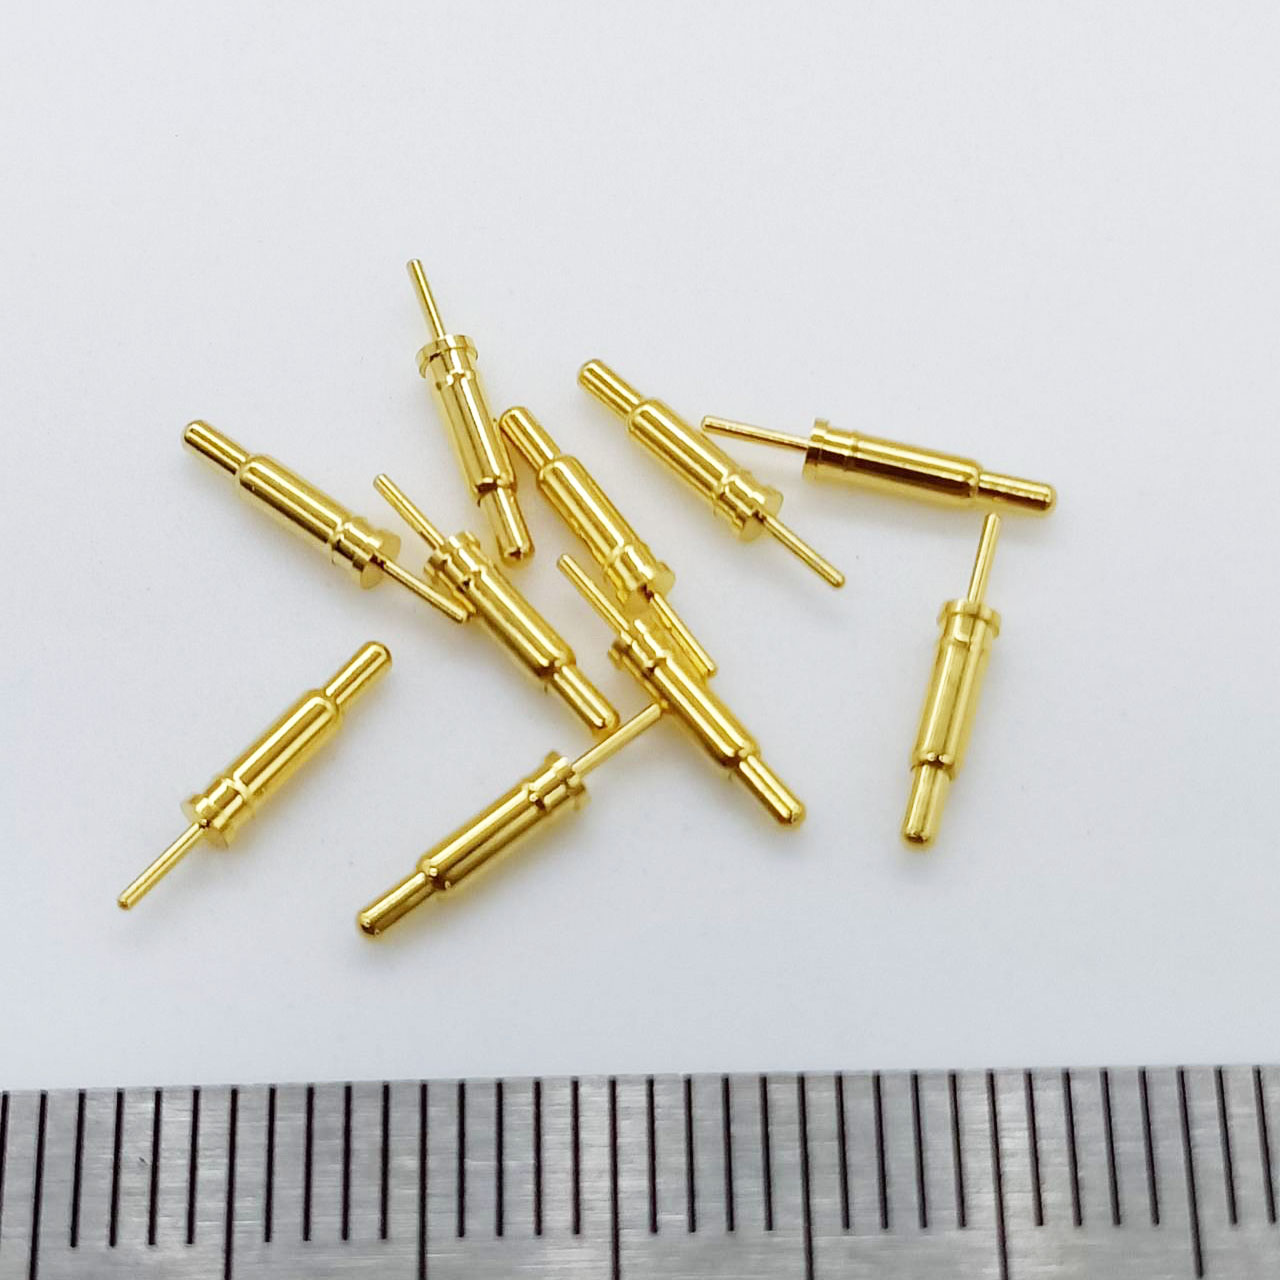 Spring-loaded connector is a type of electrical or electronic connector that uses a spring mechanism to establish and maintain a connection between two conductive components. 